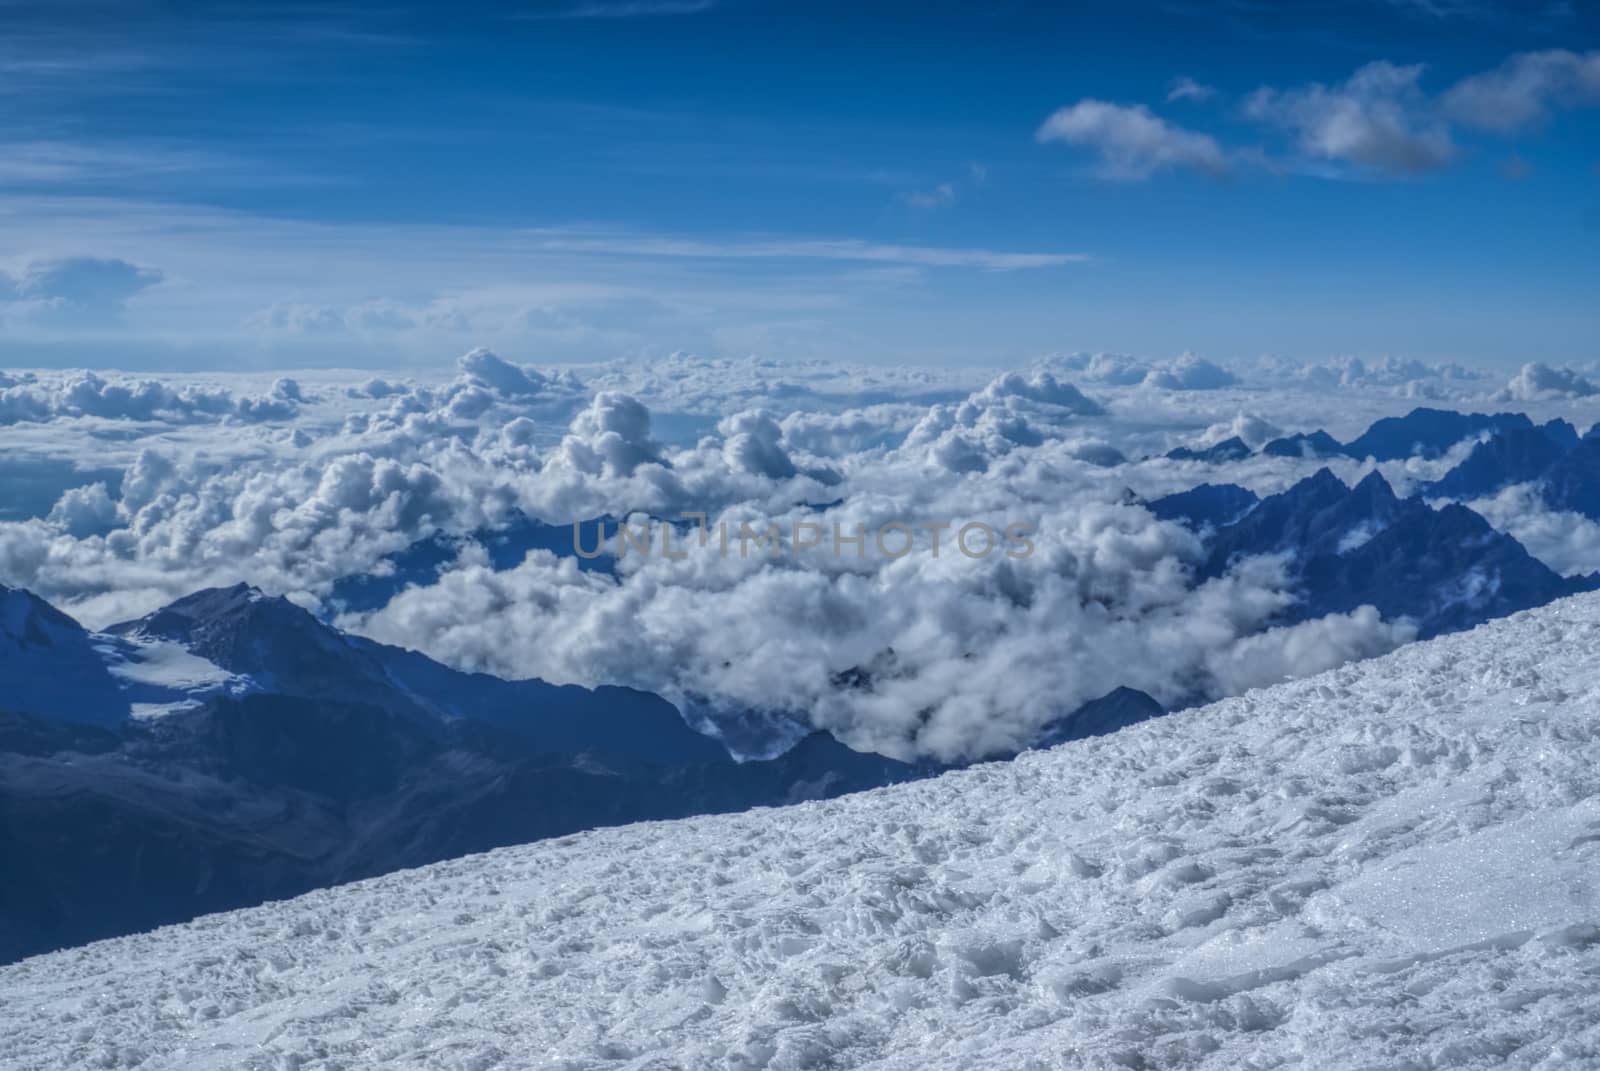 Breathtaking view from near top of Huayna Potosi mountain in Bolivia